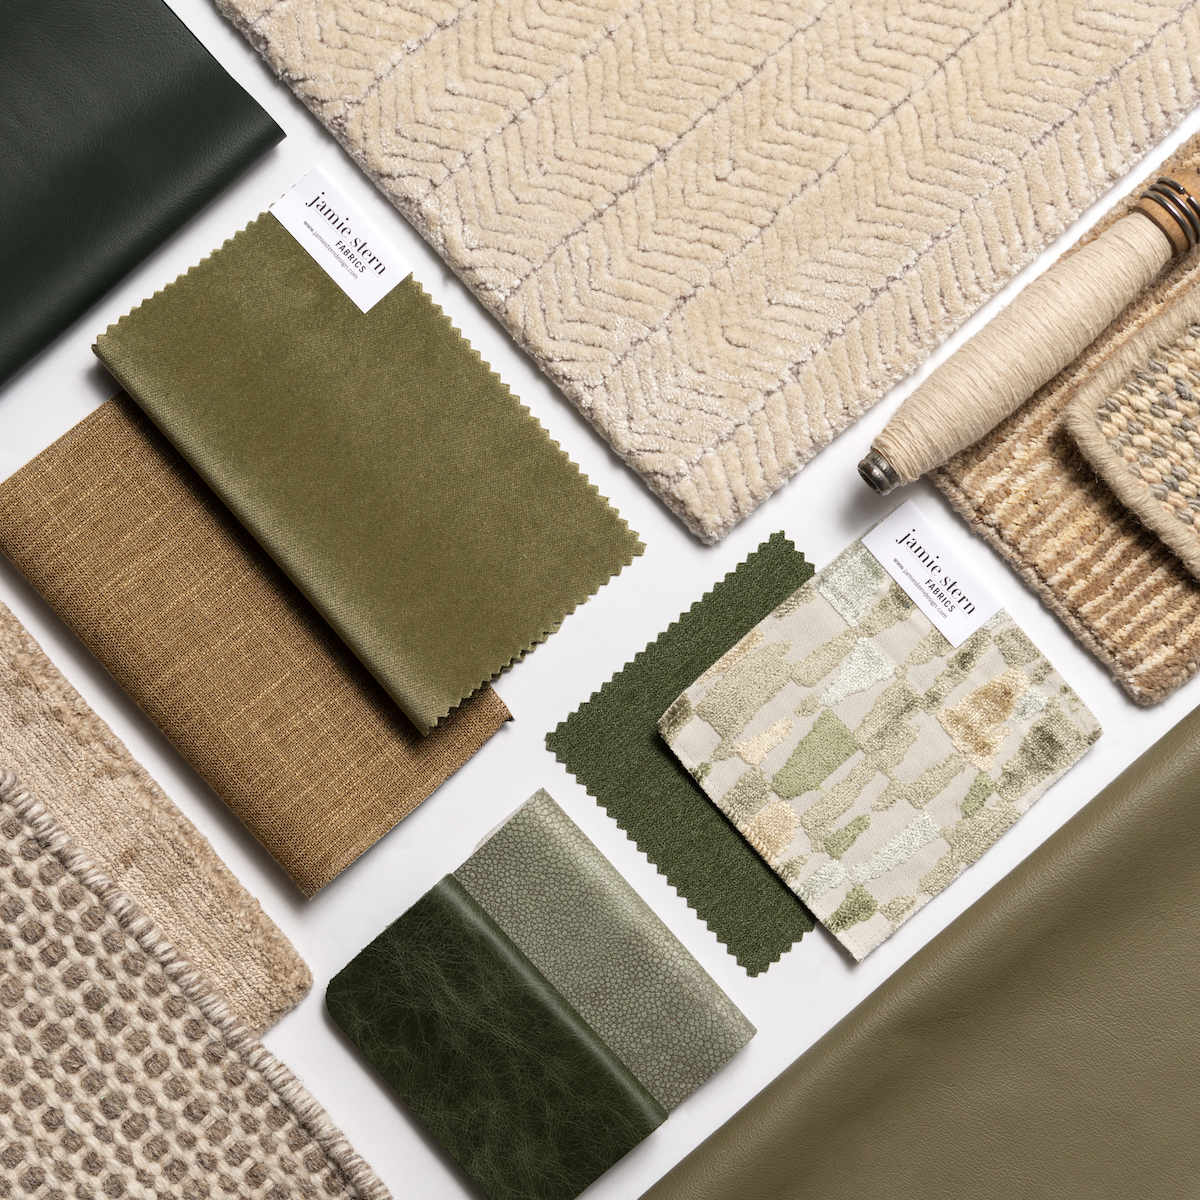 Happy Earth Day! 🌎 The Naturals Collection is born out of Jamie Stern’s commitment to natural fiber rugs and dedicated partnerships with artisan weavers. Learn More: hubs.li/Q02tGcGT0 #jamiesterndesign #earthday #rugs #naturalfibers #sustainabledesign #interiordesign